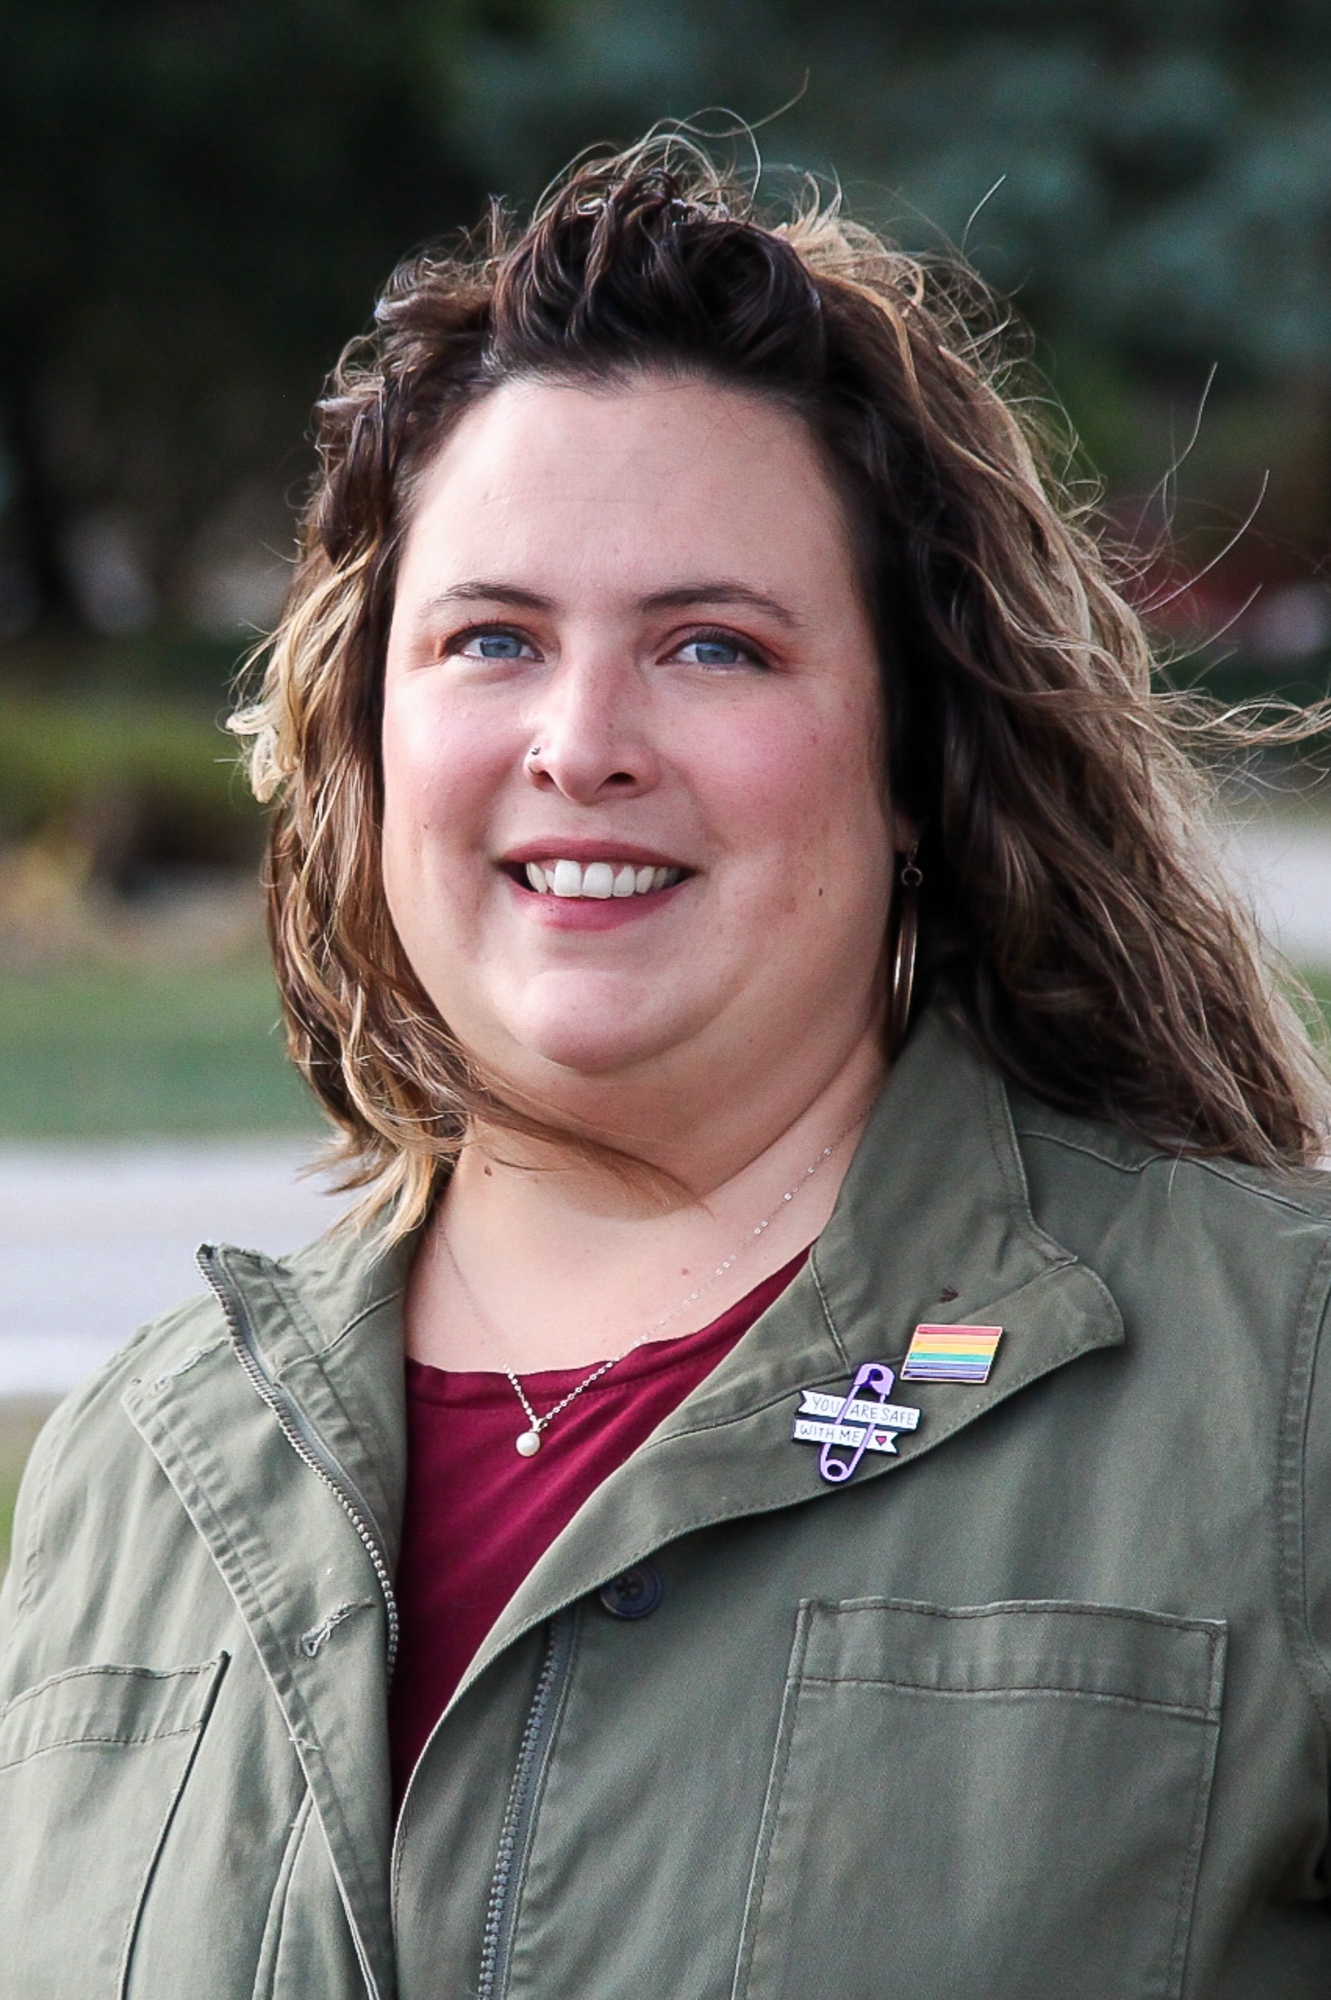 Pride Committee co-chair Joyceln Lorito smiles at camera with pride pins on her jacket